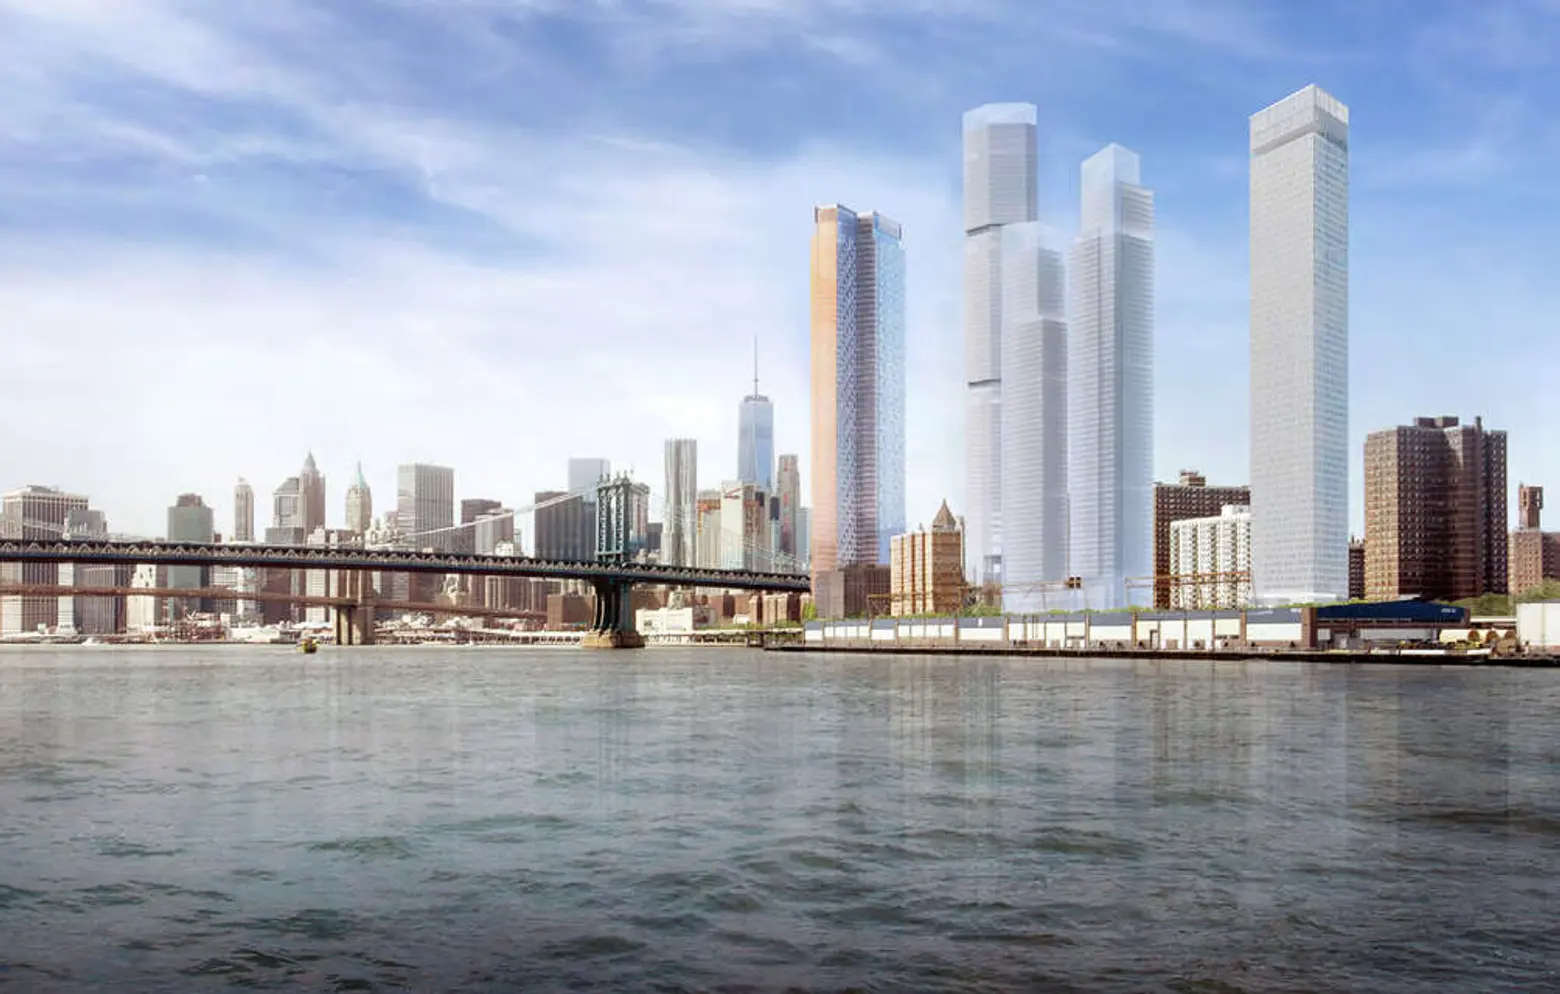 Judge upholds decision to halt Two Bridges megatowers from rising